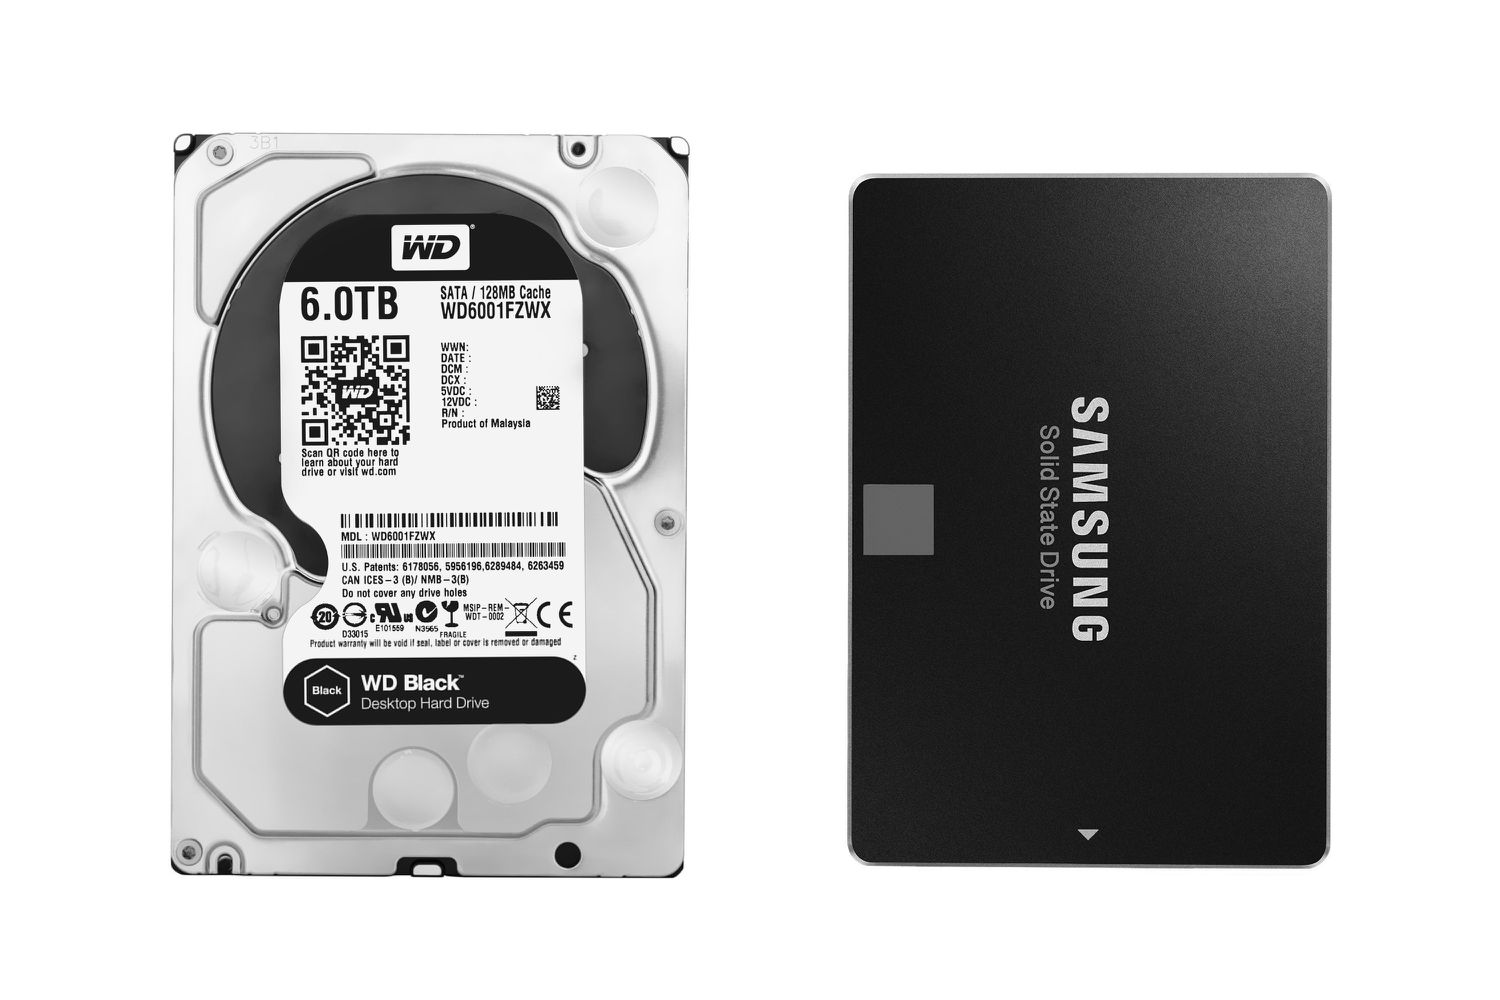 What Are Solid State Drives And Hard Drives?